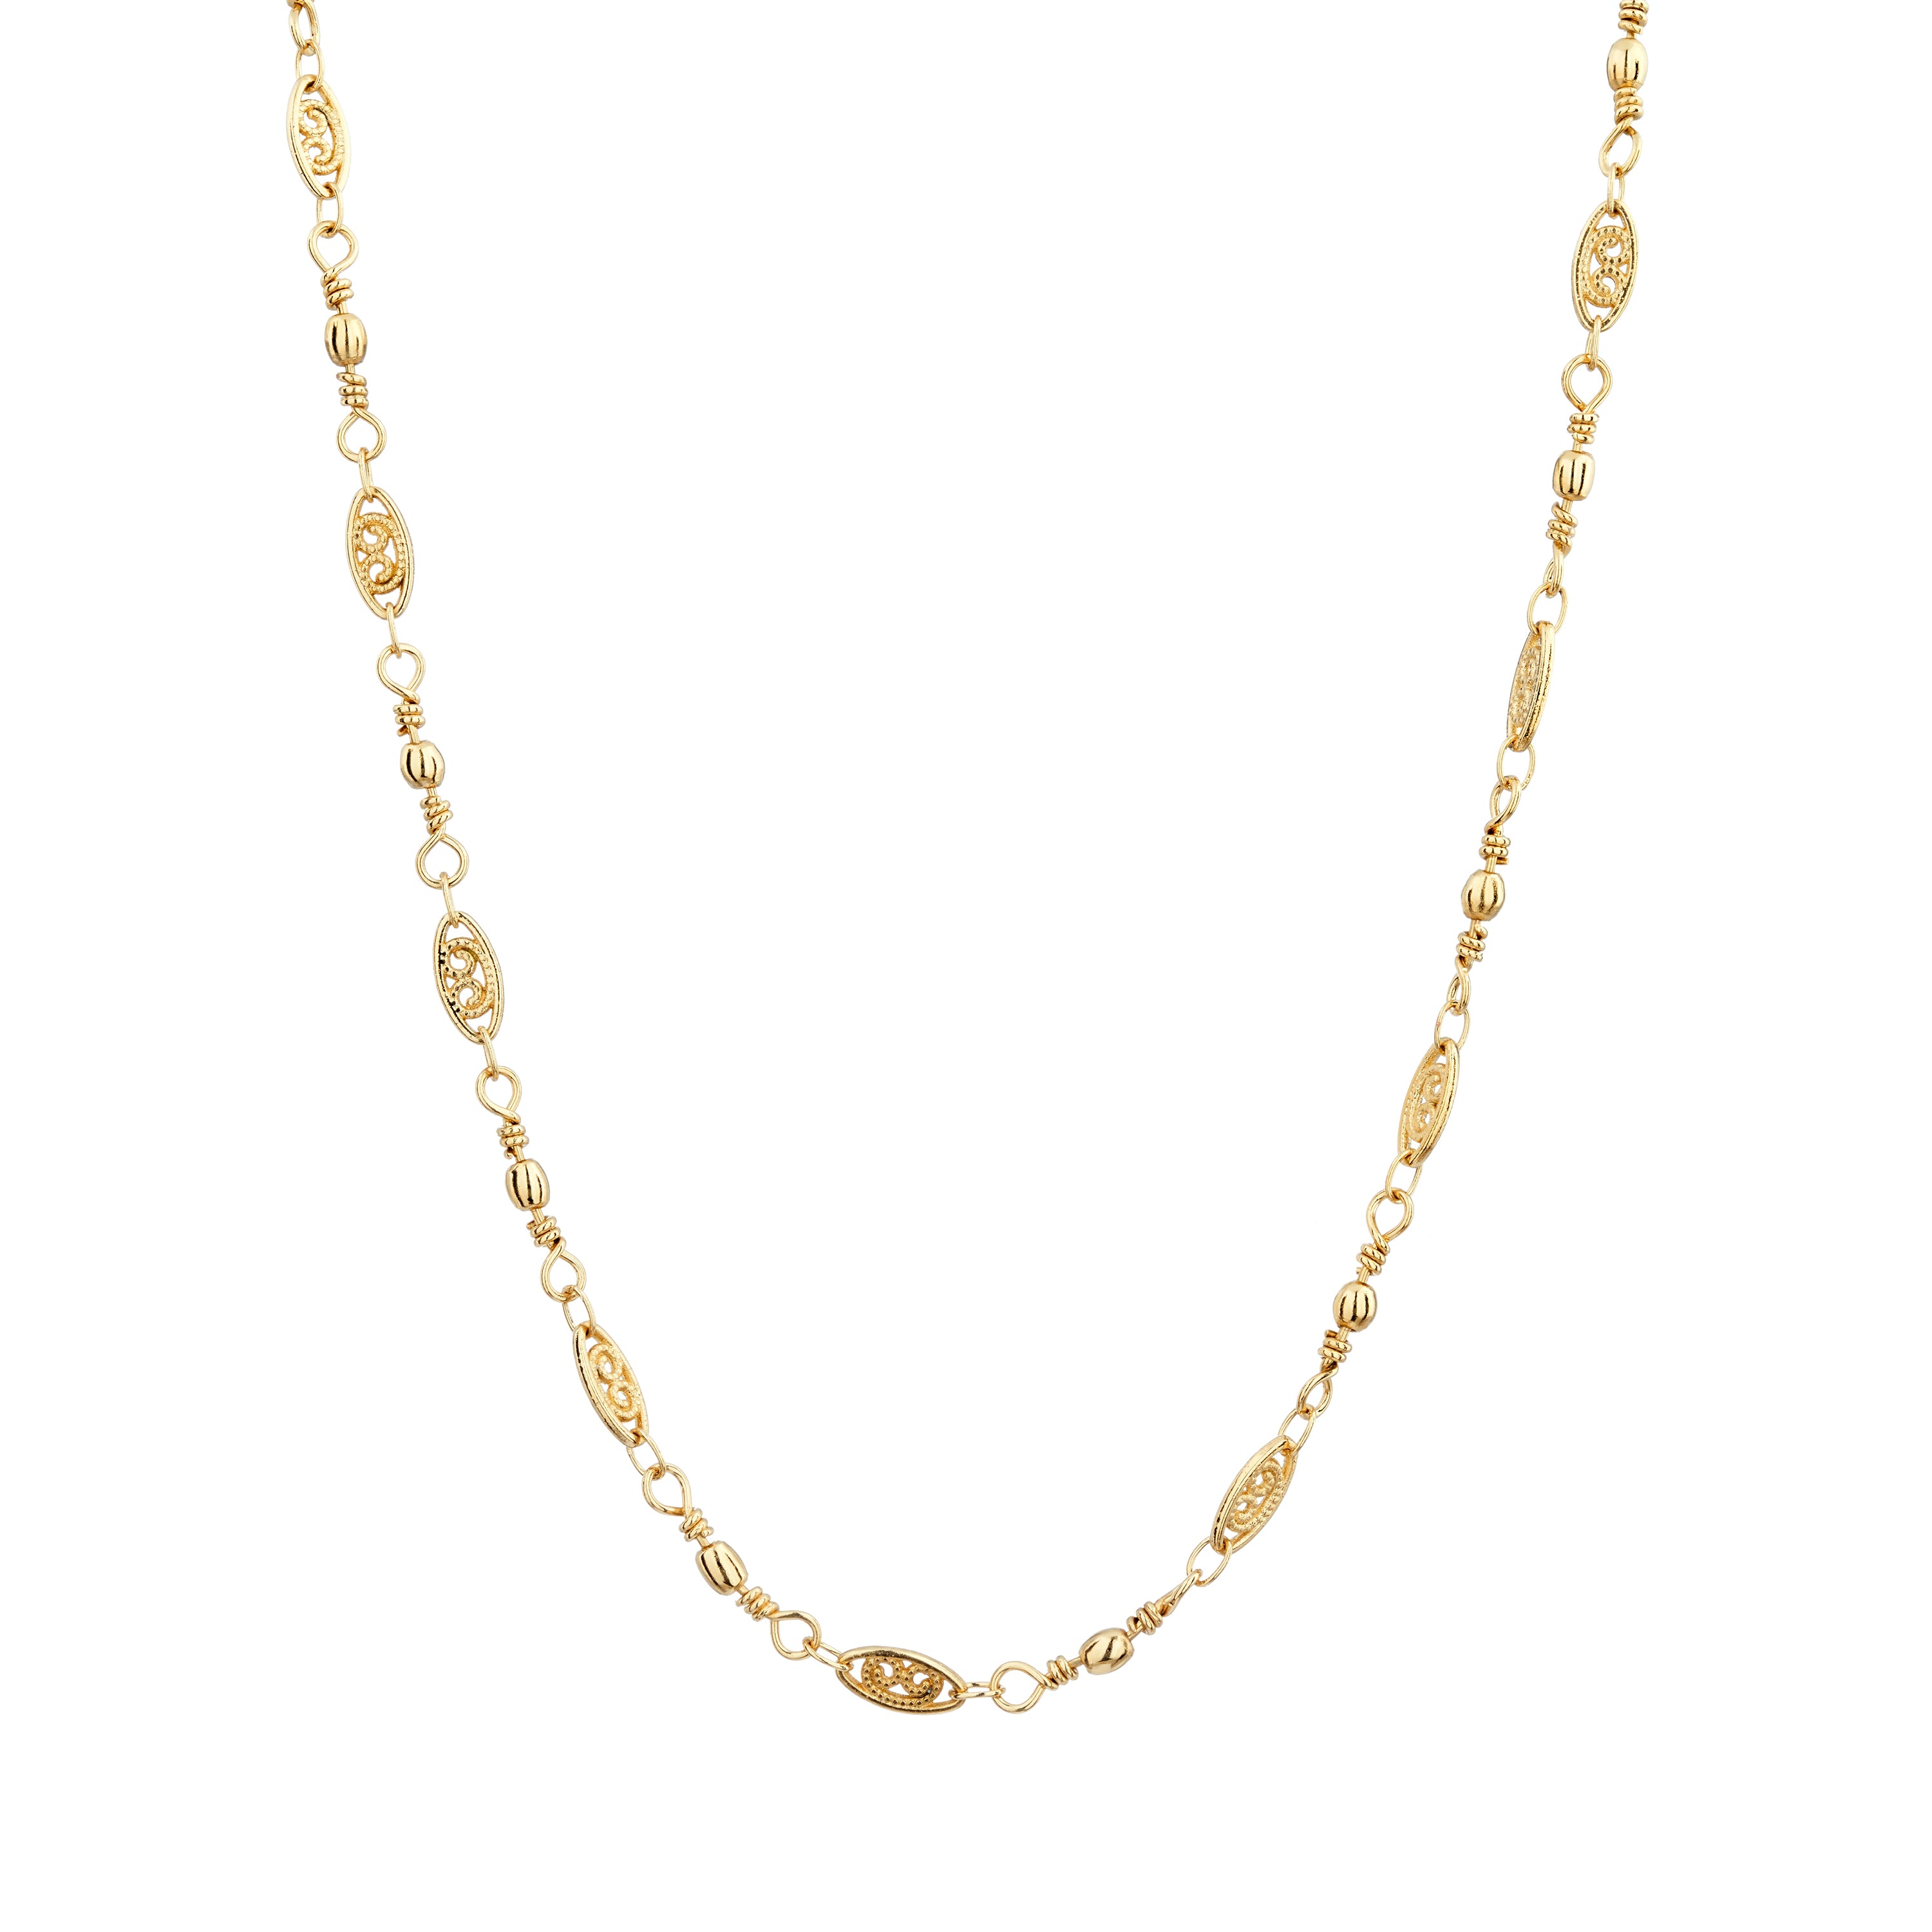 Louise Chain Necklace - Mirabelle Jewellery